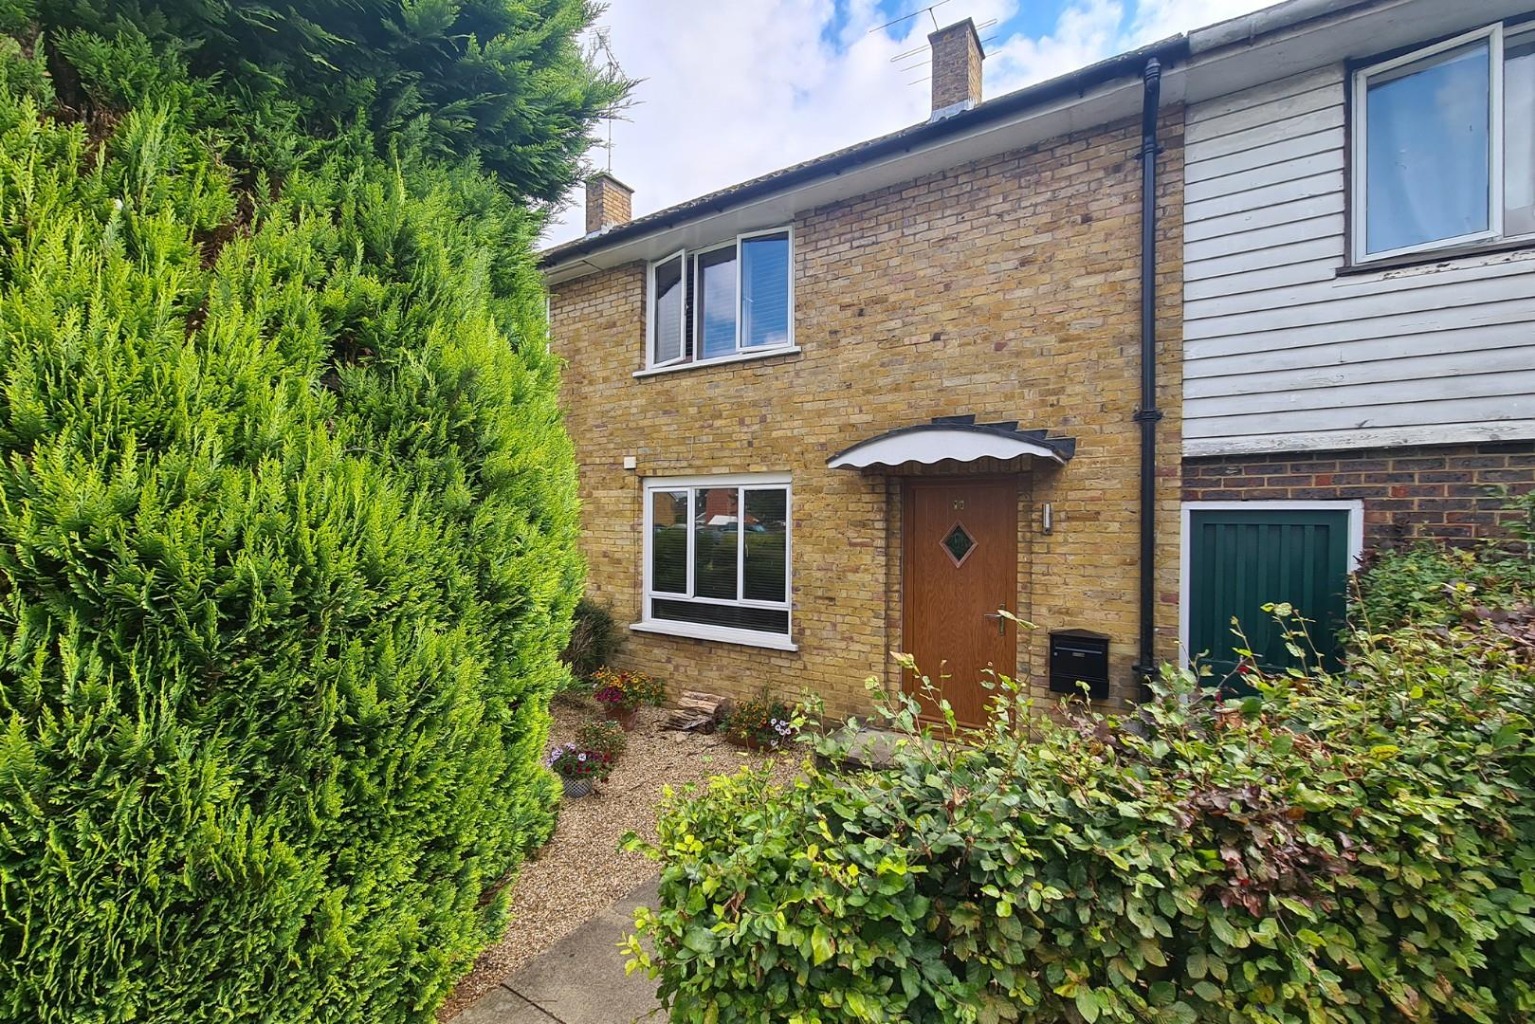 2 bed terraced house for sale in Clive Green, Bracknell, RG12